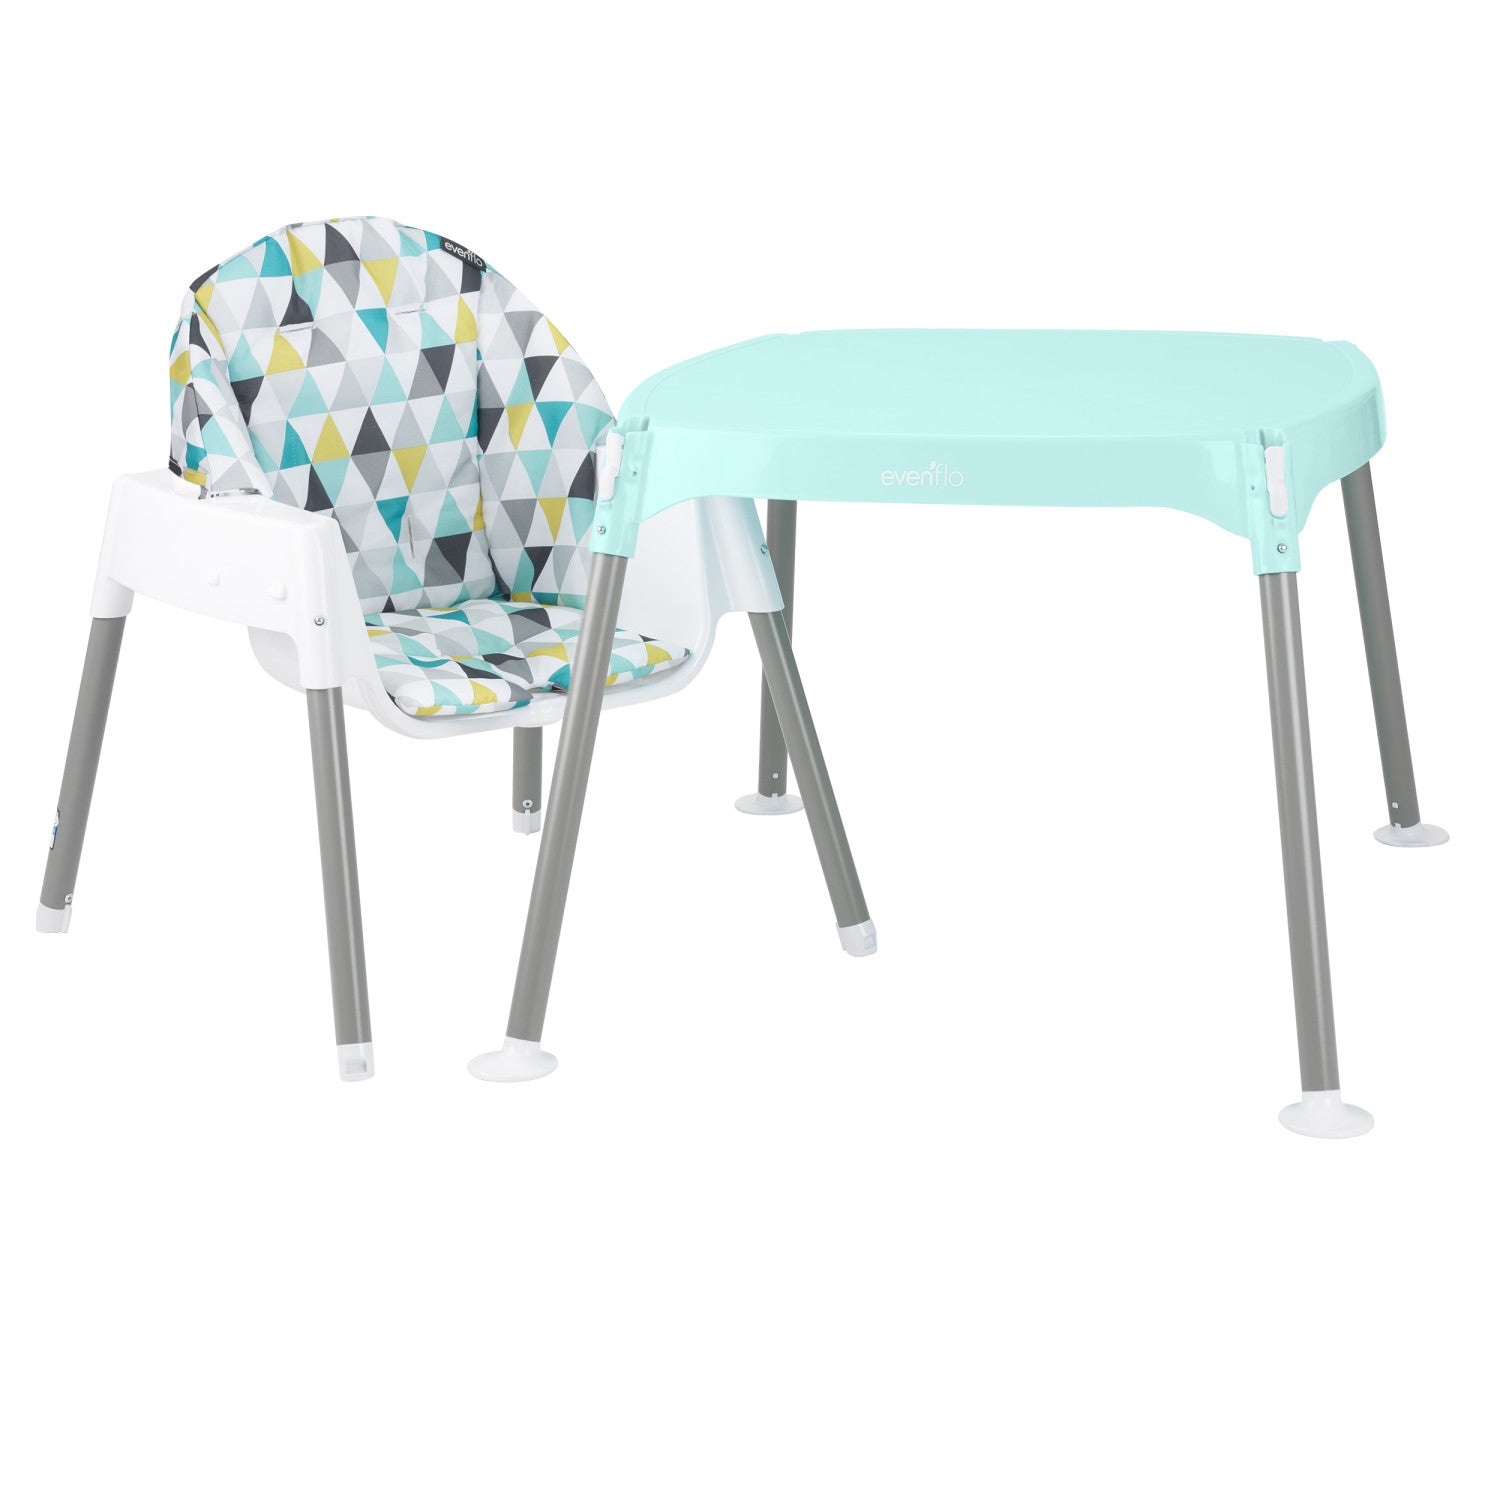 Evenflo Eat and Grow 4-in-1 Convertible High Chair, Prism Triangles